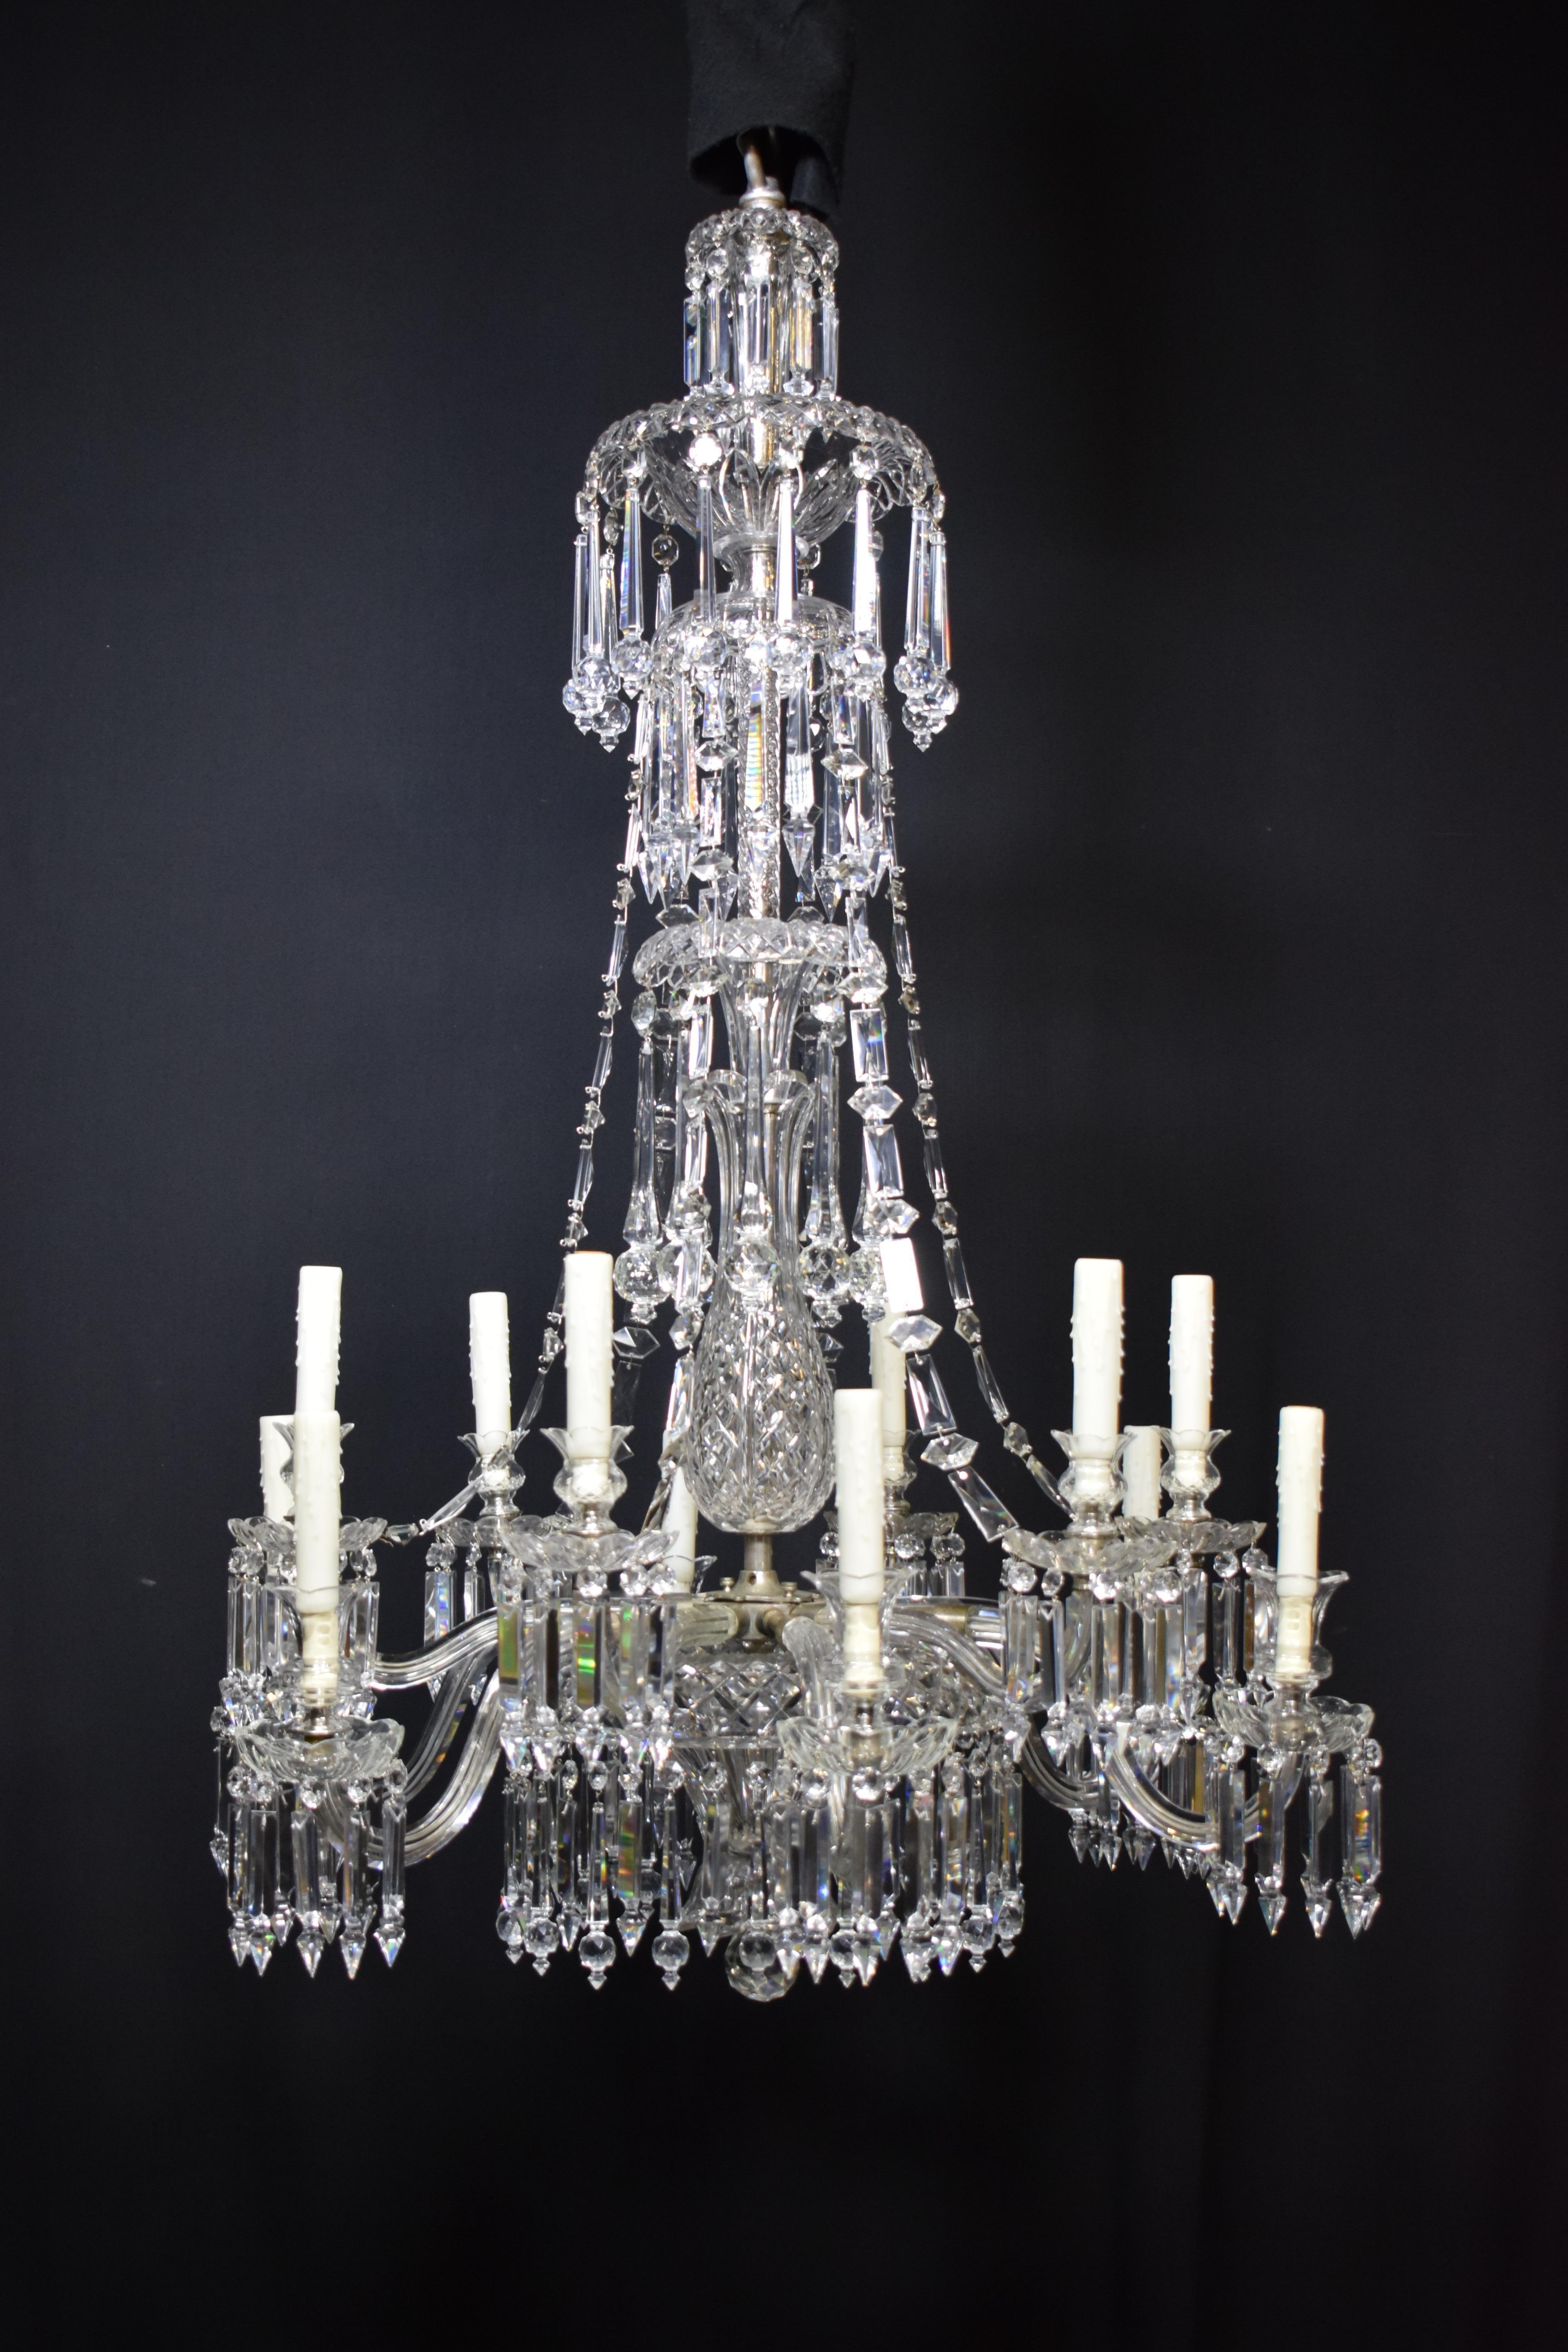 Superb F & C Osler crystal chandelier originally for gas and electricity, now electrified. Truly Exceptional. Stamped F & C Osler. F & C Osler, Birmingham England, late 19th century. Some of Osler's chandeliers can be found in Buckingham Palace,